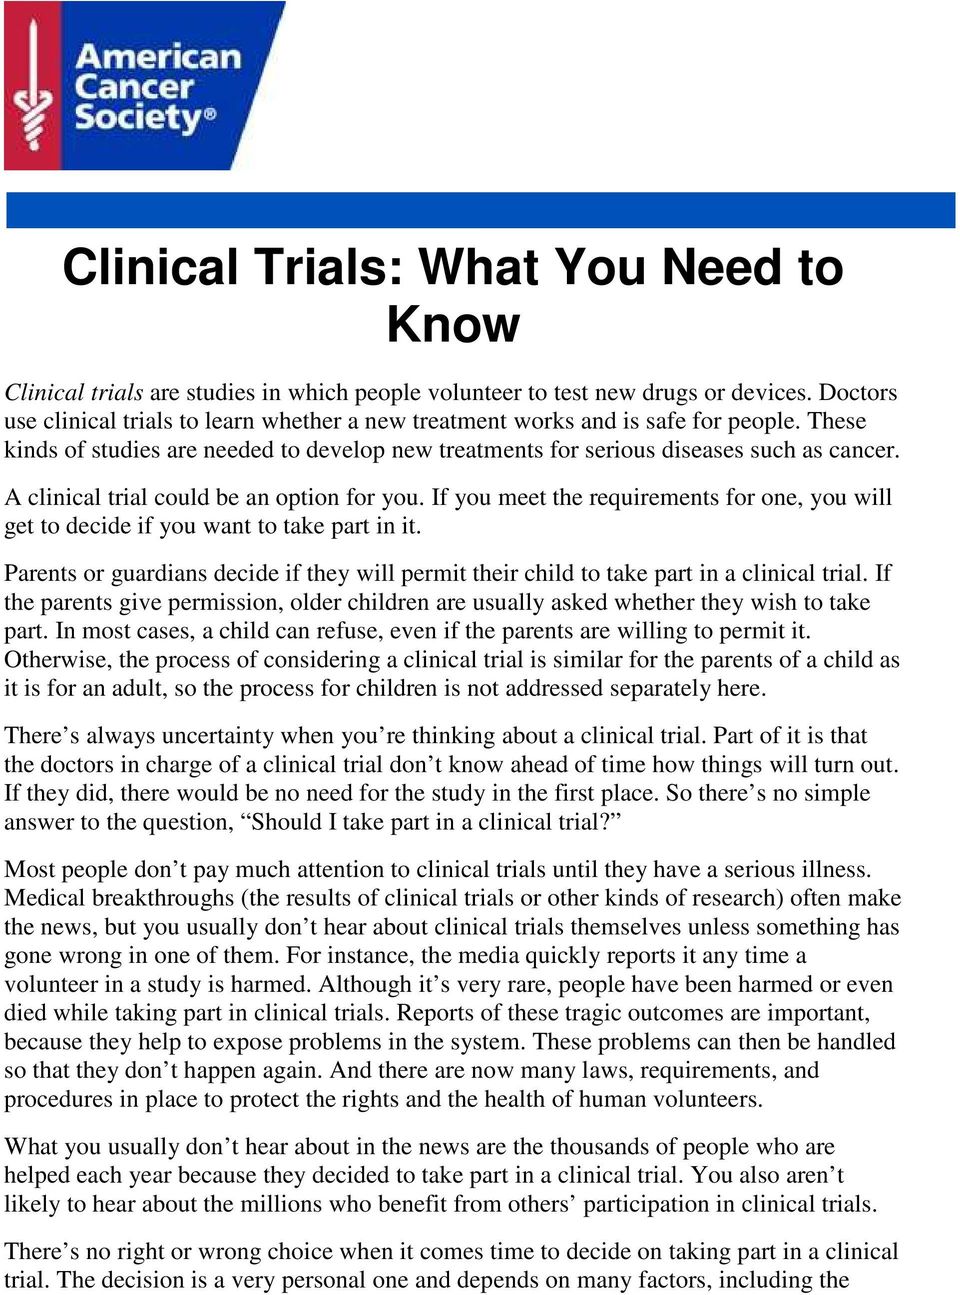 A clinical trial could be an option for you. If you meet the requirements for one, you will get to decide if you want to take part in it.